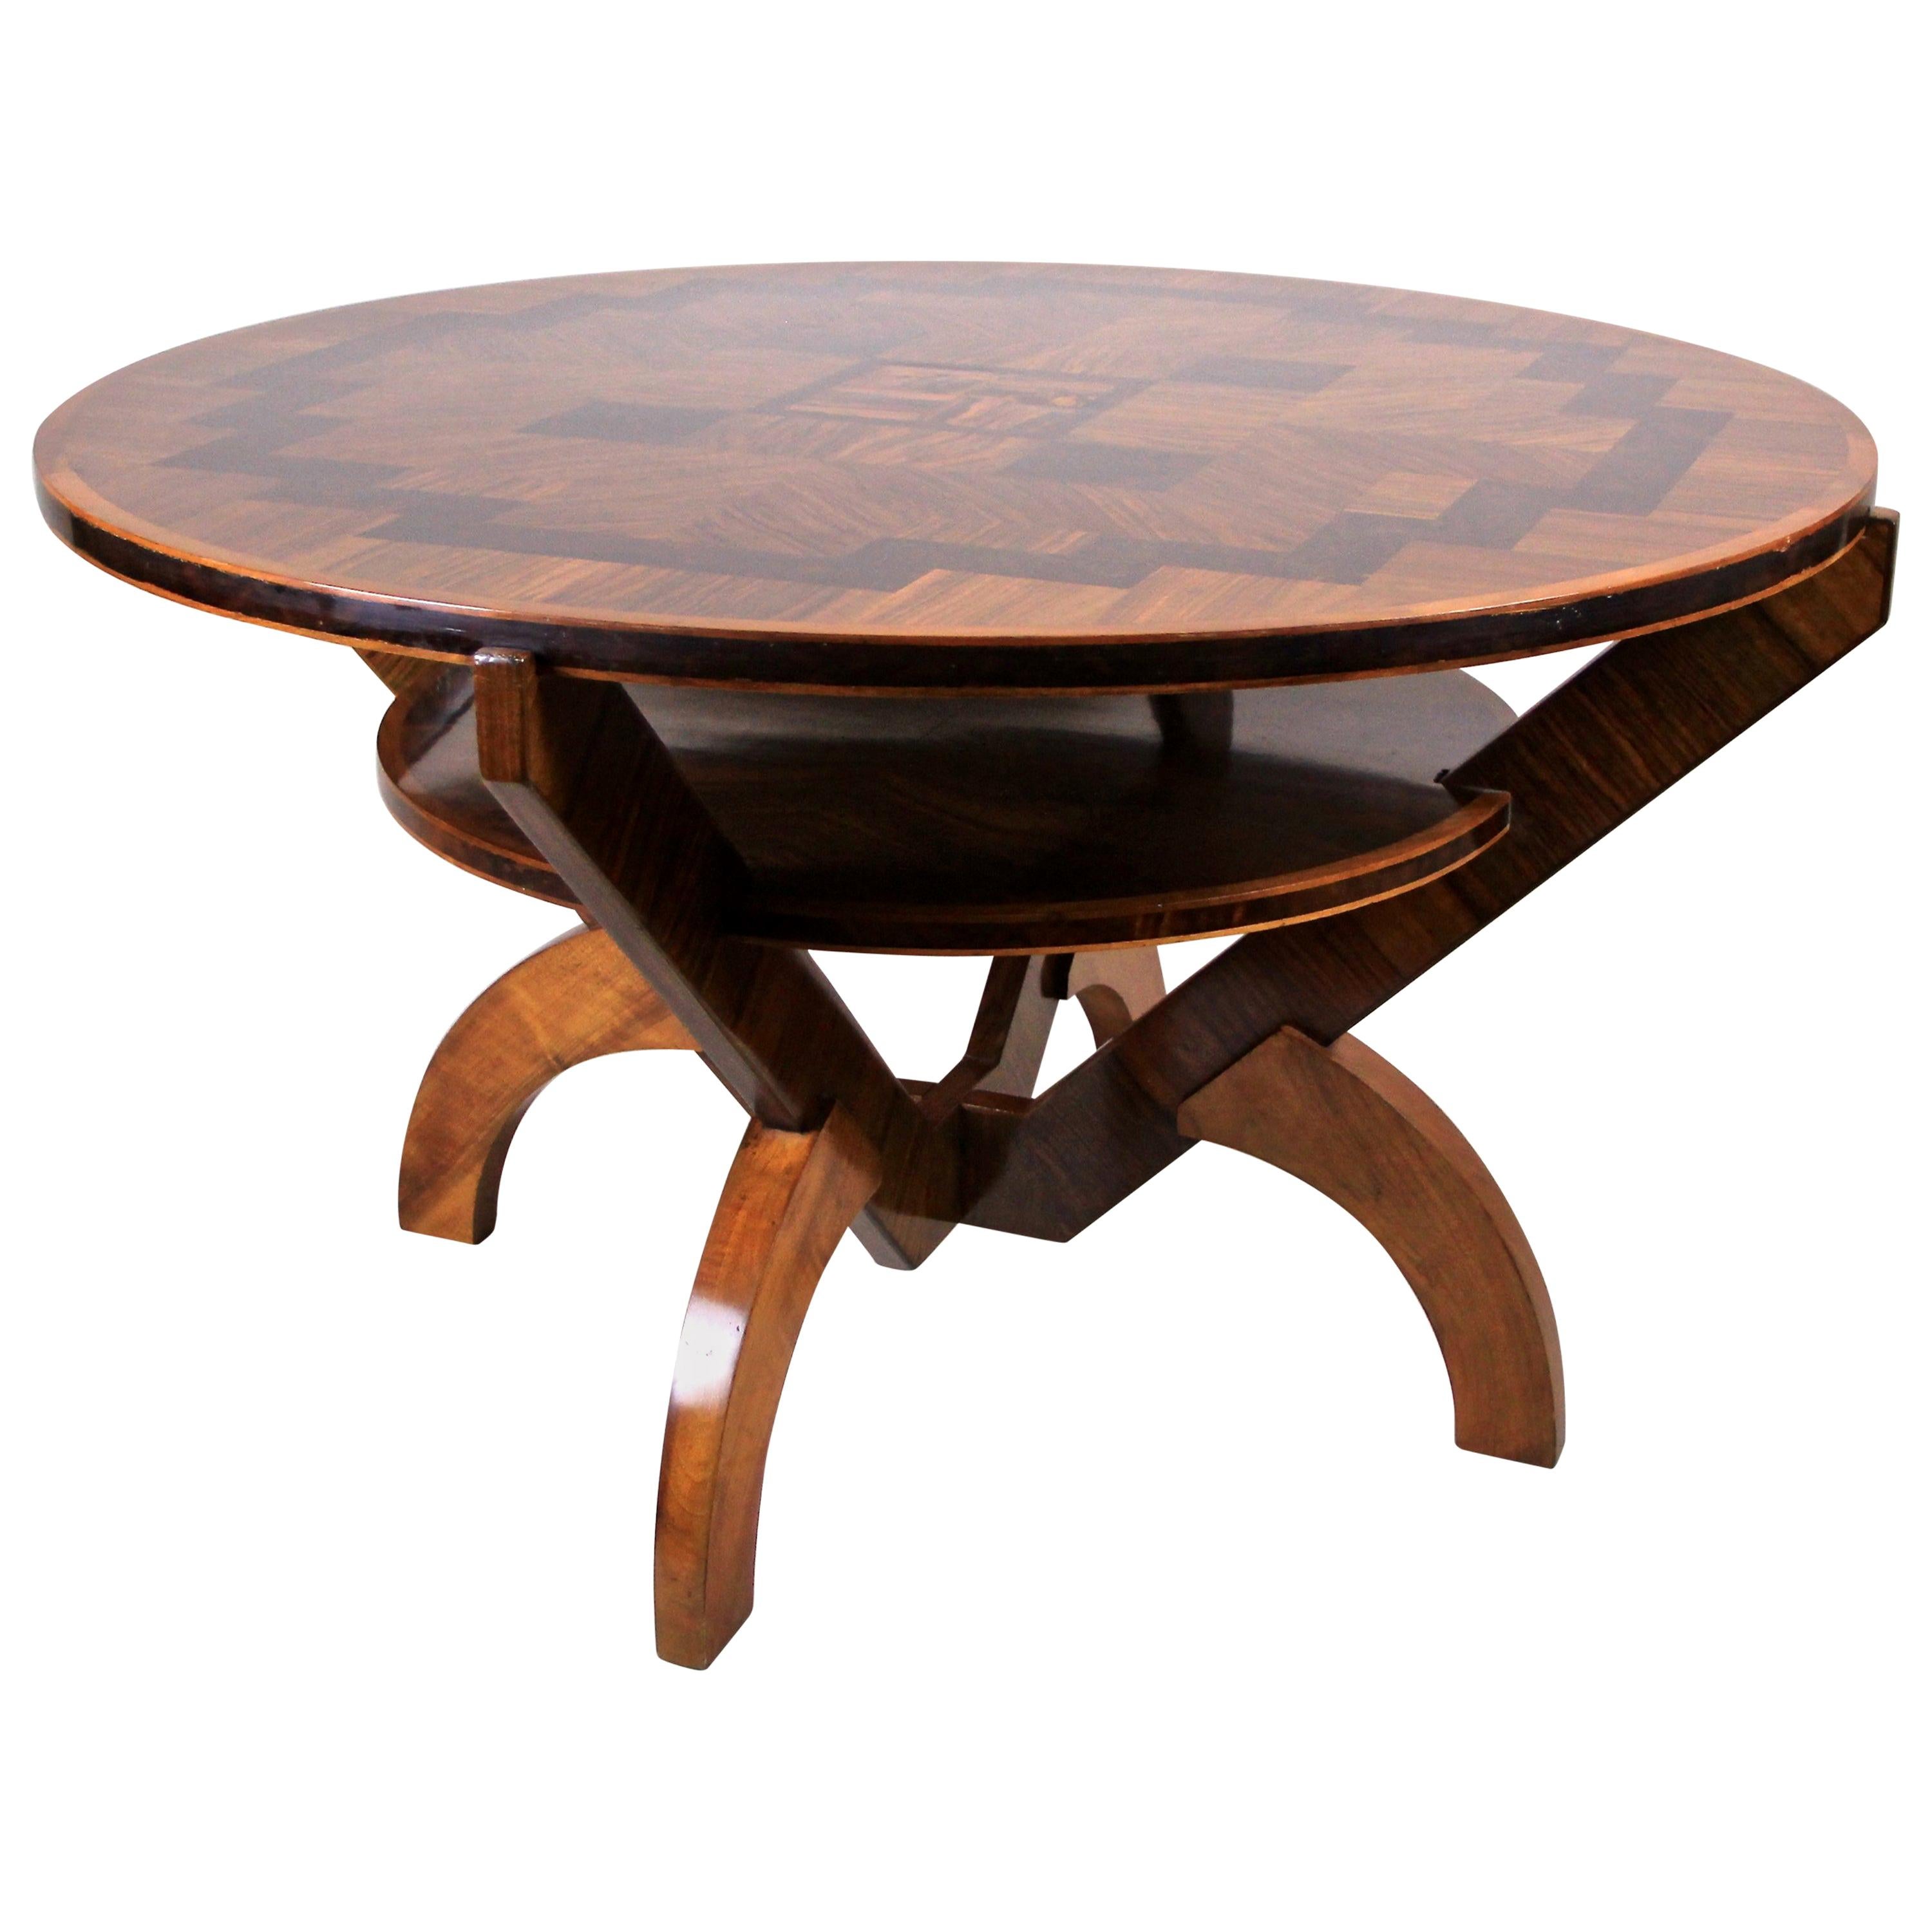 Art Deco Table with Marquetry Work by A. Herrgesell, Austria, circa 1925